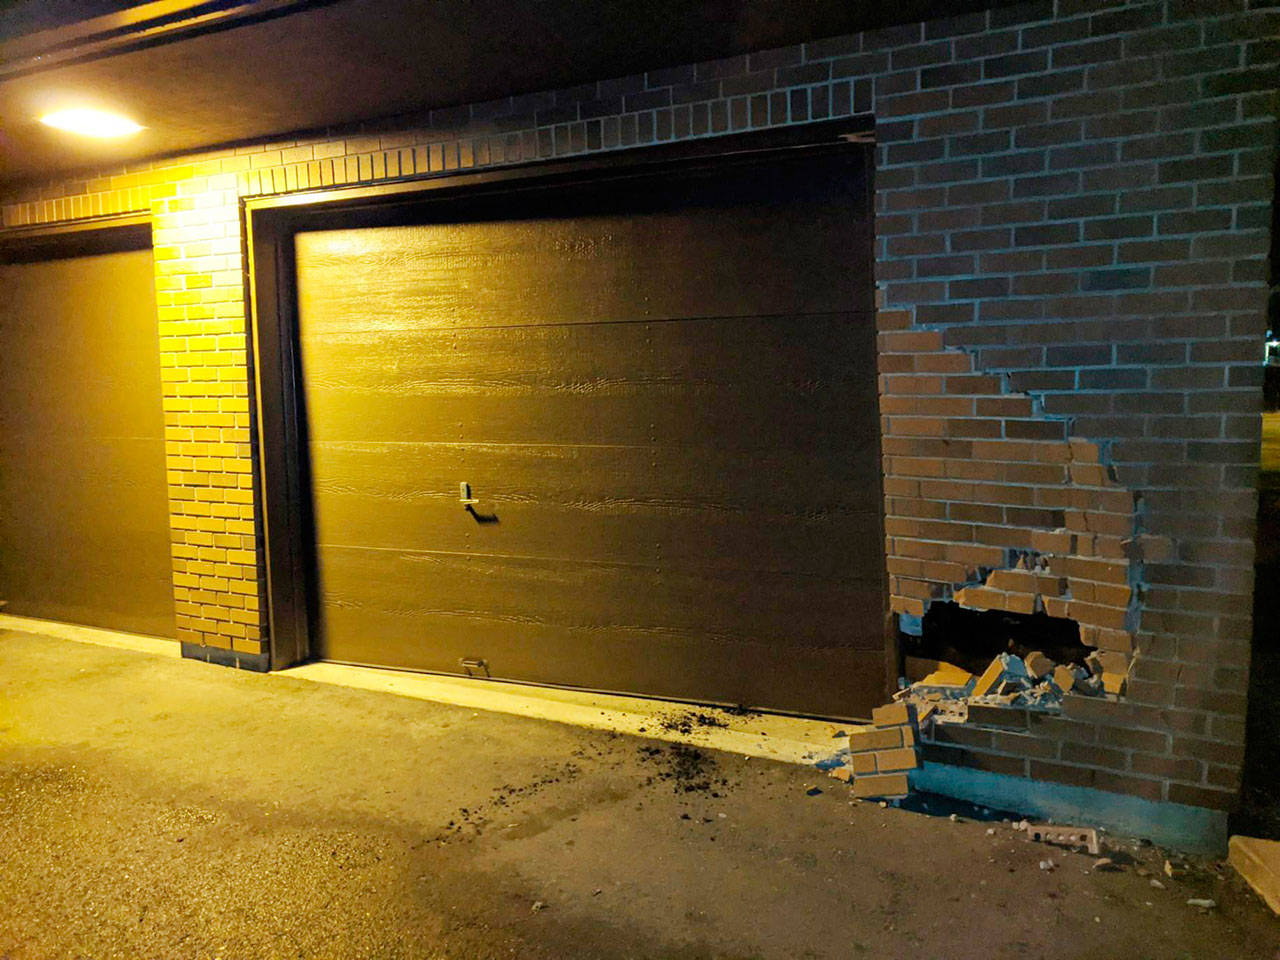 Law enforcement officials say a vehicle crashed into the Washington State Patrol building off Old Olympic Highway, pushing the exterior wall in about 12 inches. No one was injured in the incident. Photo courtesy of Washington State Patrol